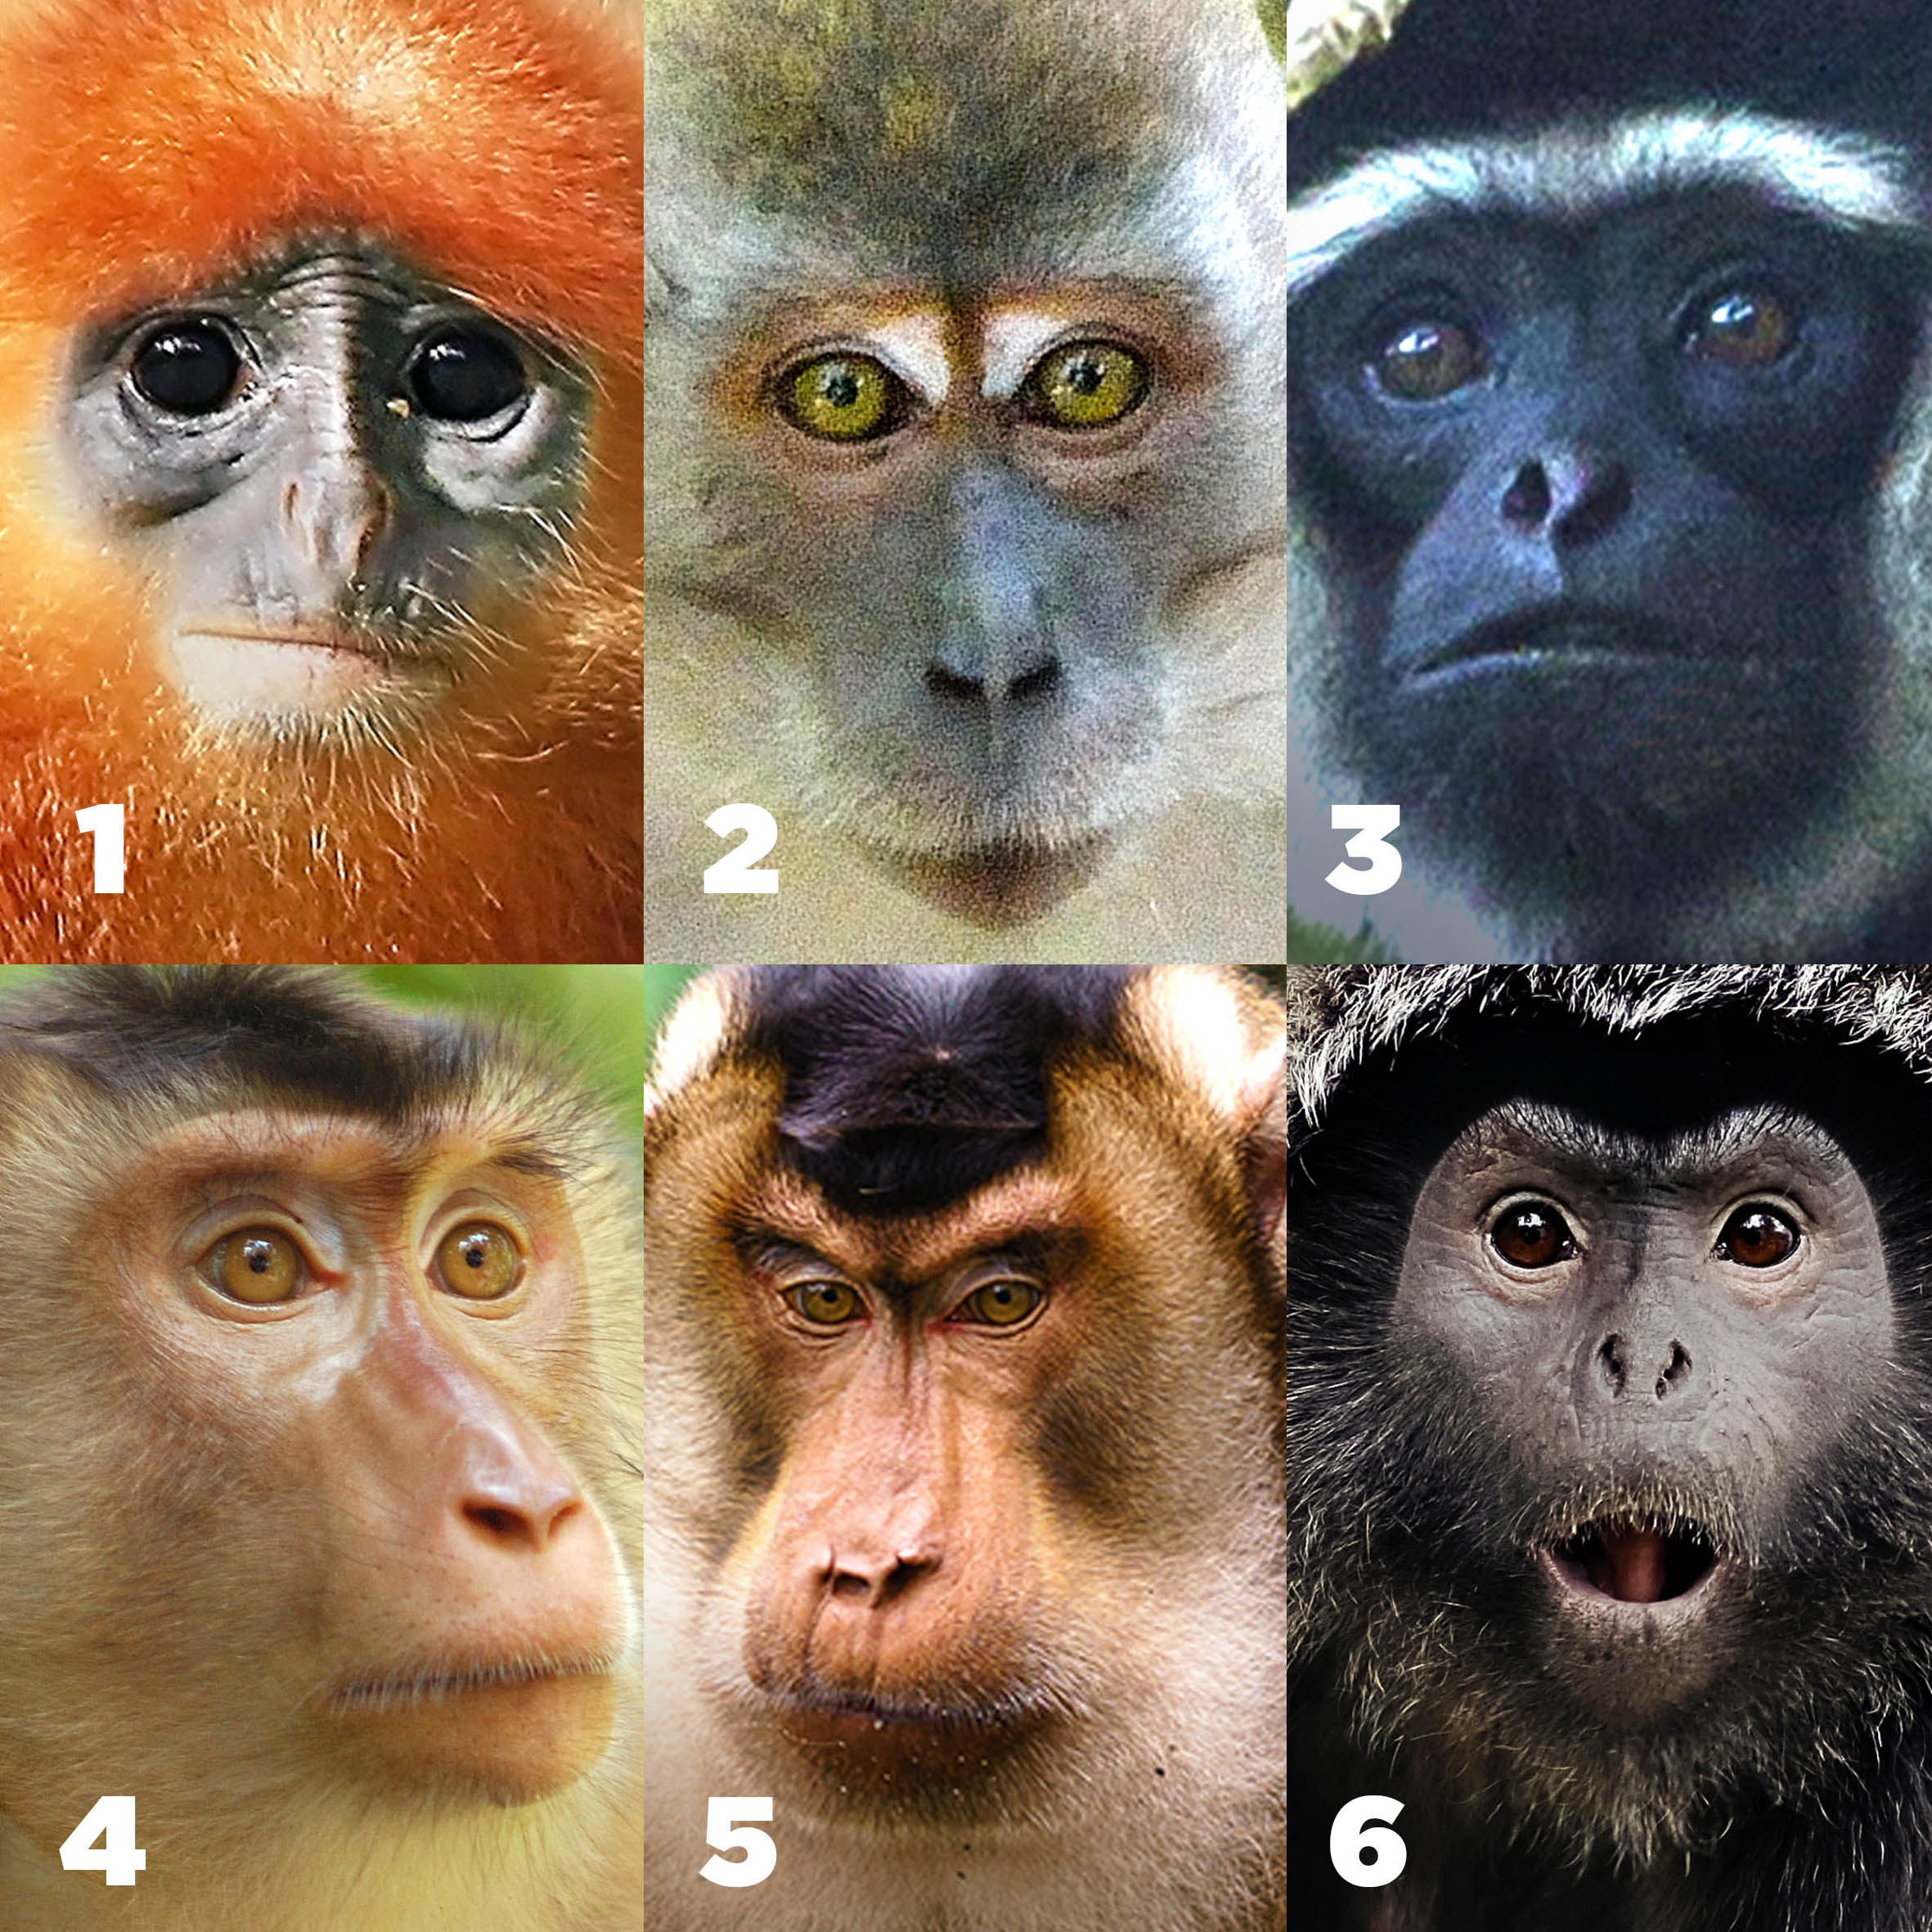 Many people use the terms “apes” and “monkeys” interchangeably, even though they are significantly different. Find out the difference between apes and monkeys.